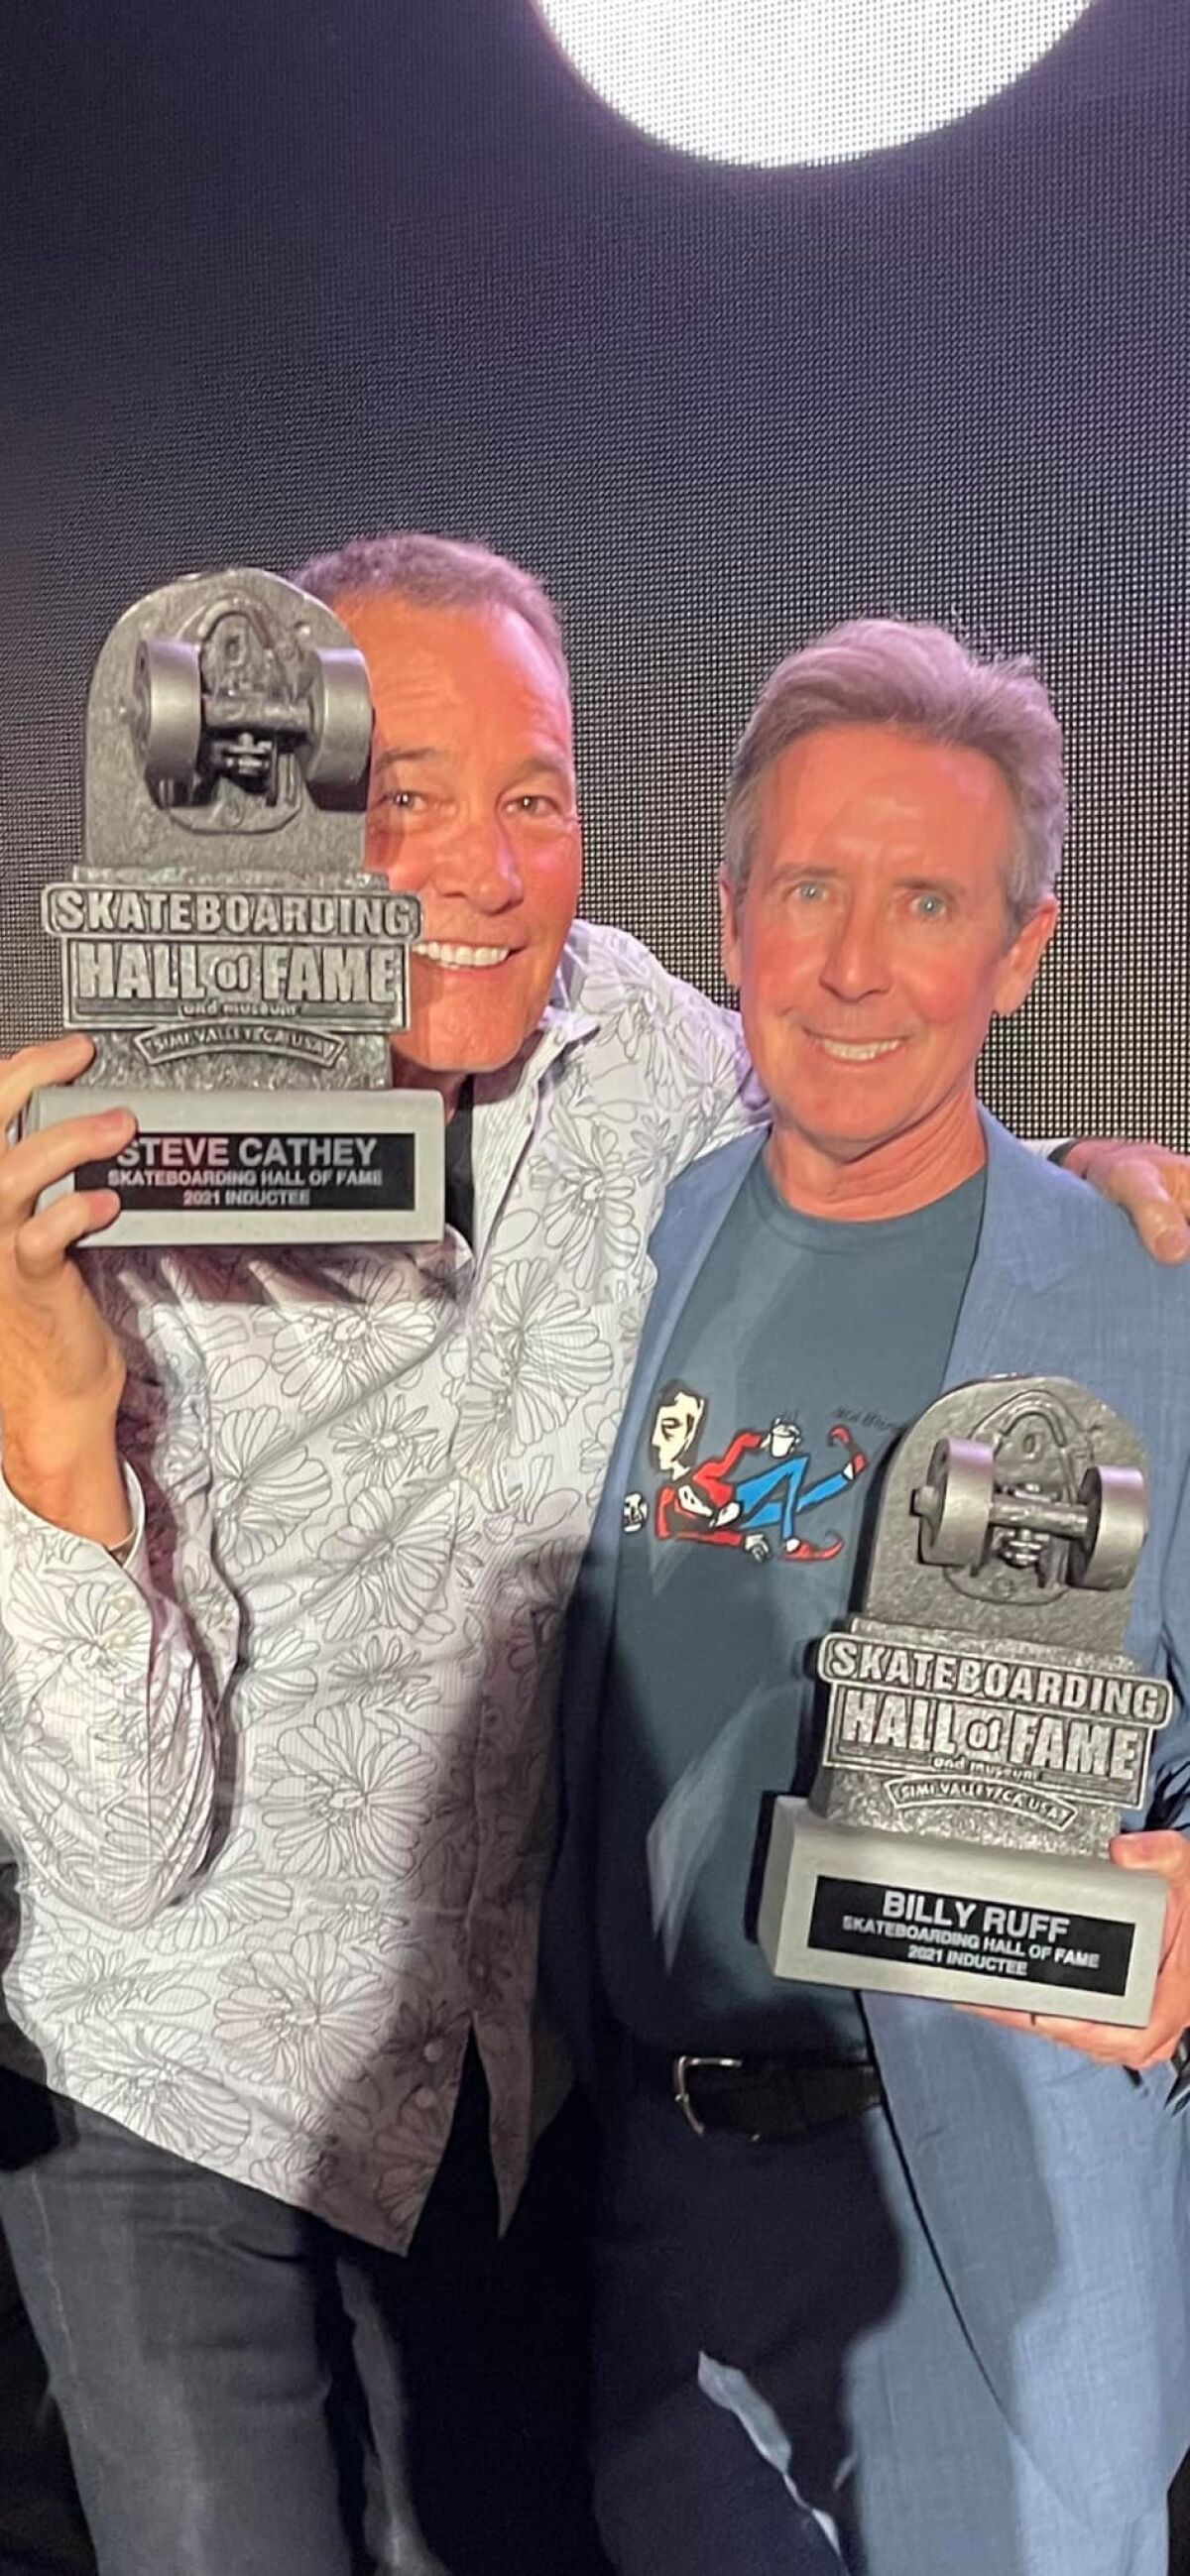 San Diegans Steve Cathey and Billy Ruff were inducted in the Skateboarding Hall of Fame's 2021 class.